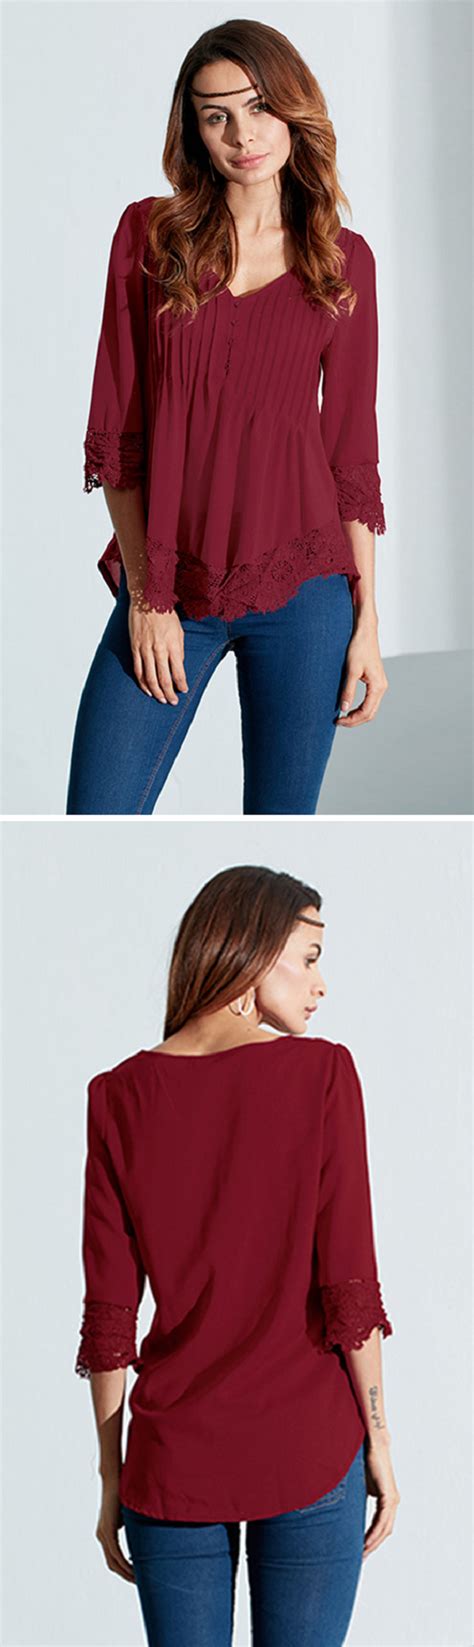 Us 1081 Sexy Casual V Neck Lace Crochet 34 Sleeve Slim Blouse For Women Casual Outfits Cute